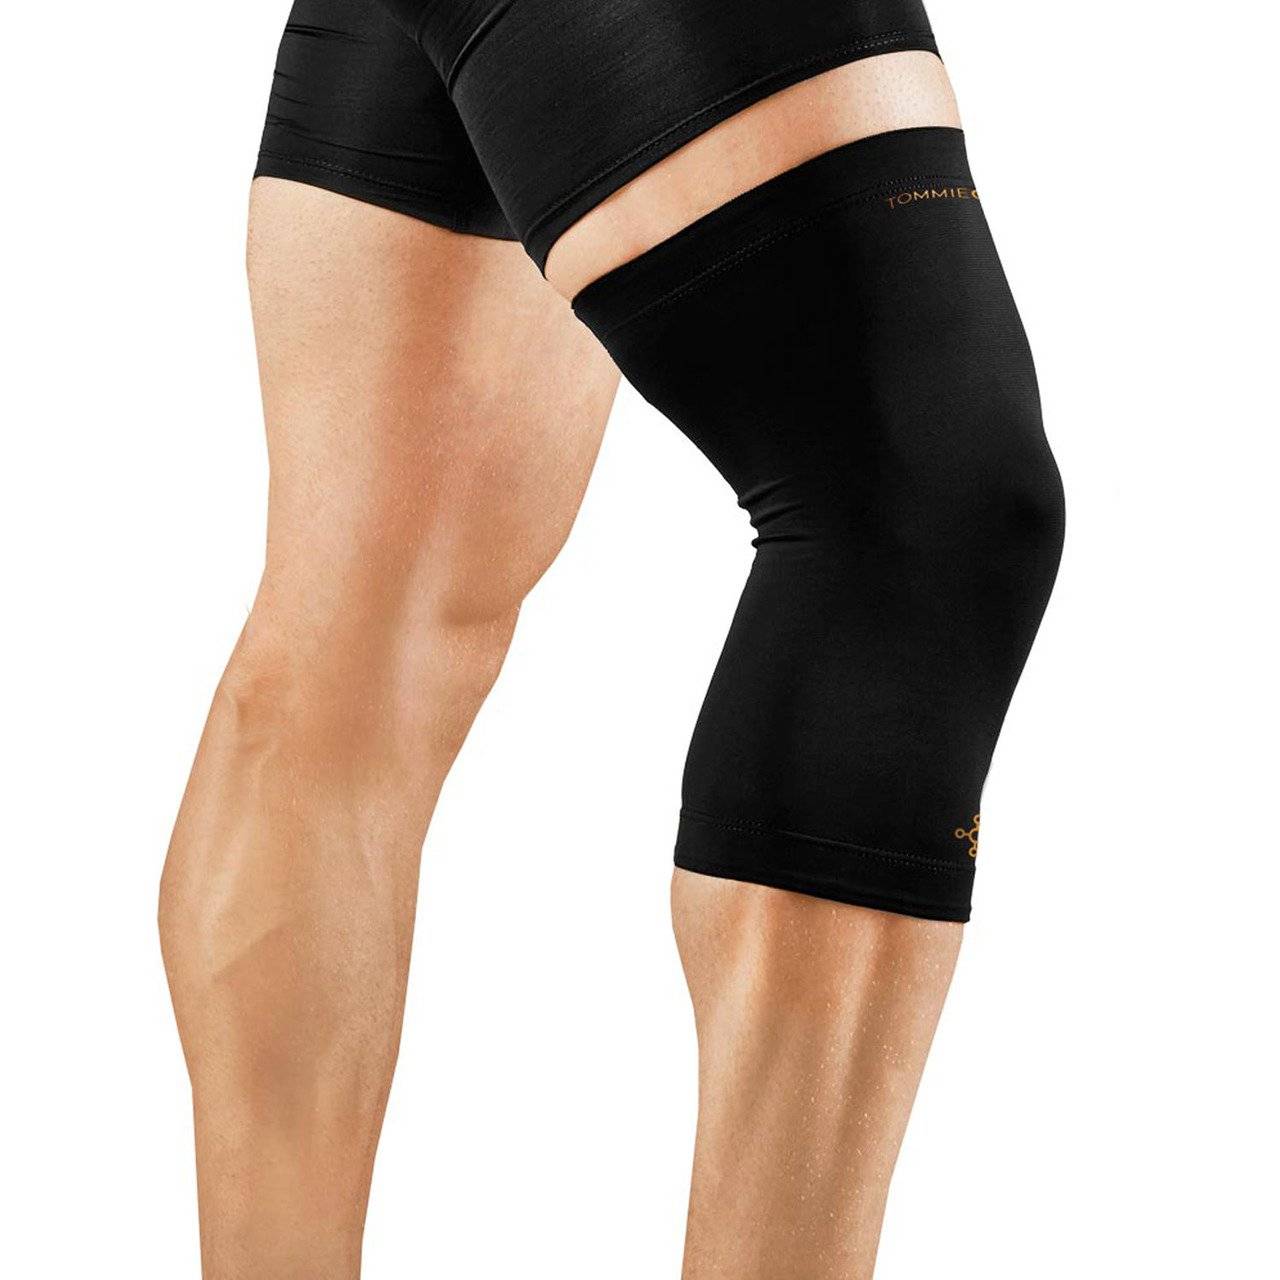  Tommie Copper Performance Compression Quad Sleeve, Unisex, Men  & Women, Sweat Wicking Breathable Upper Leg Sleeve for Muscle Support &  Recovery - Black - Small : Health & Household